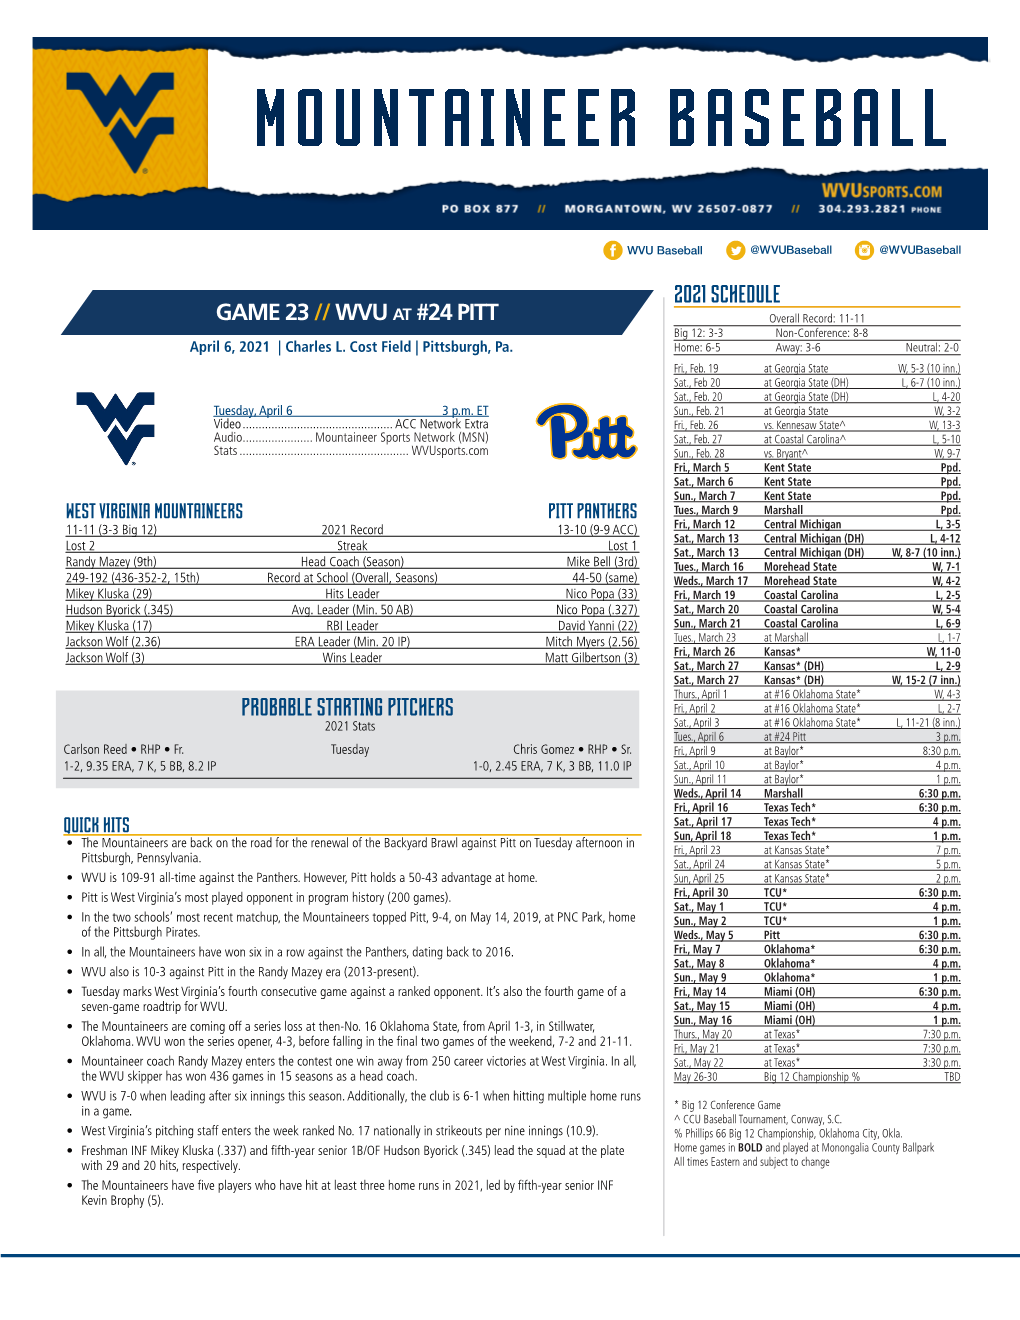 2021 Schedule Game 23 //Wvu at #24 Pitt Probable Starting